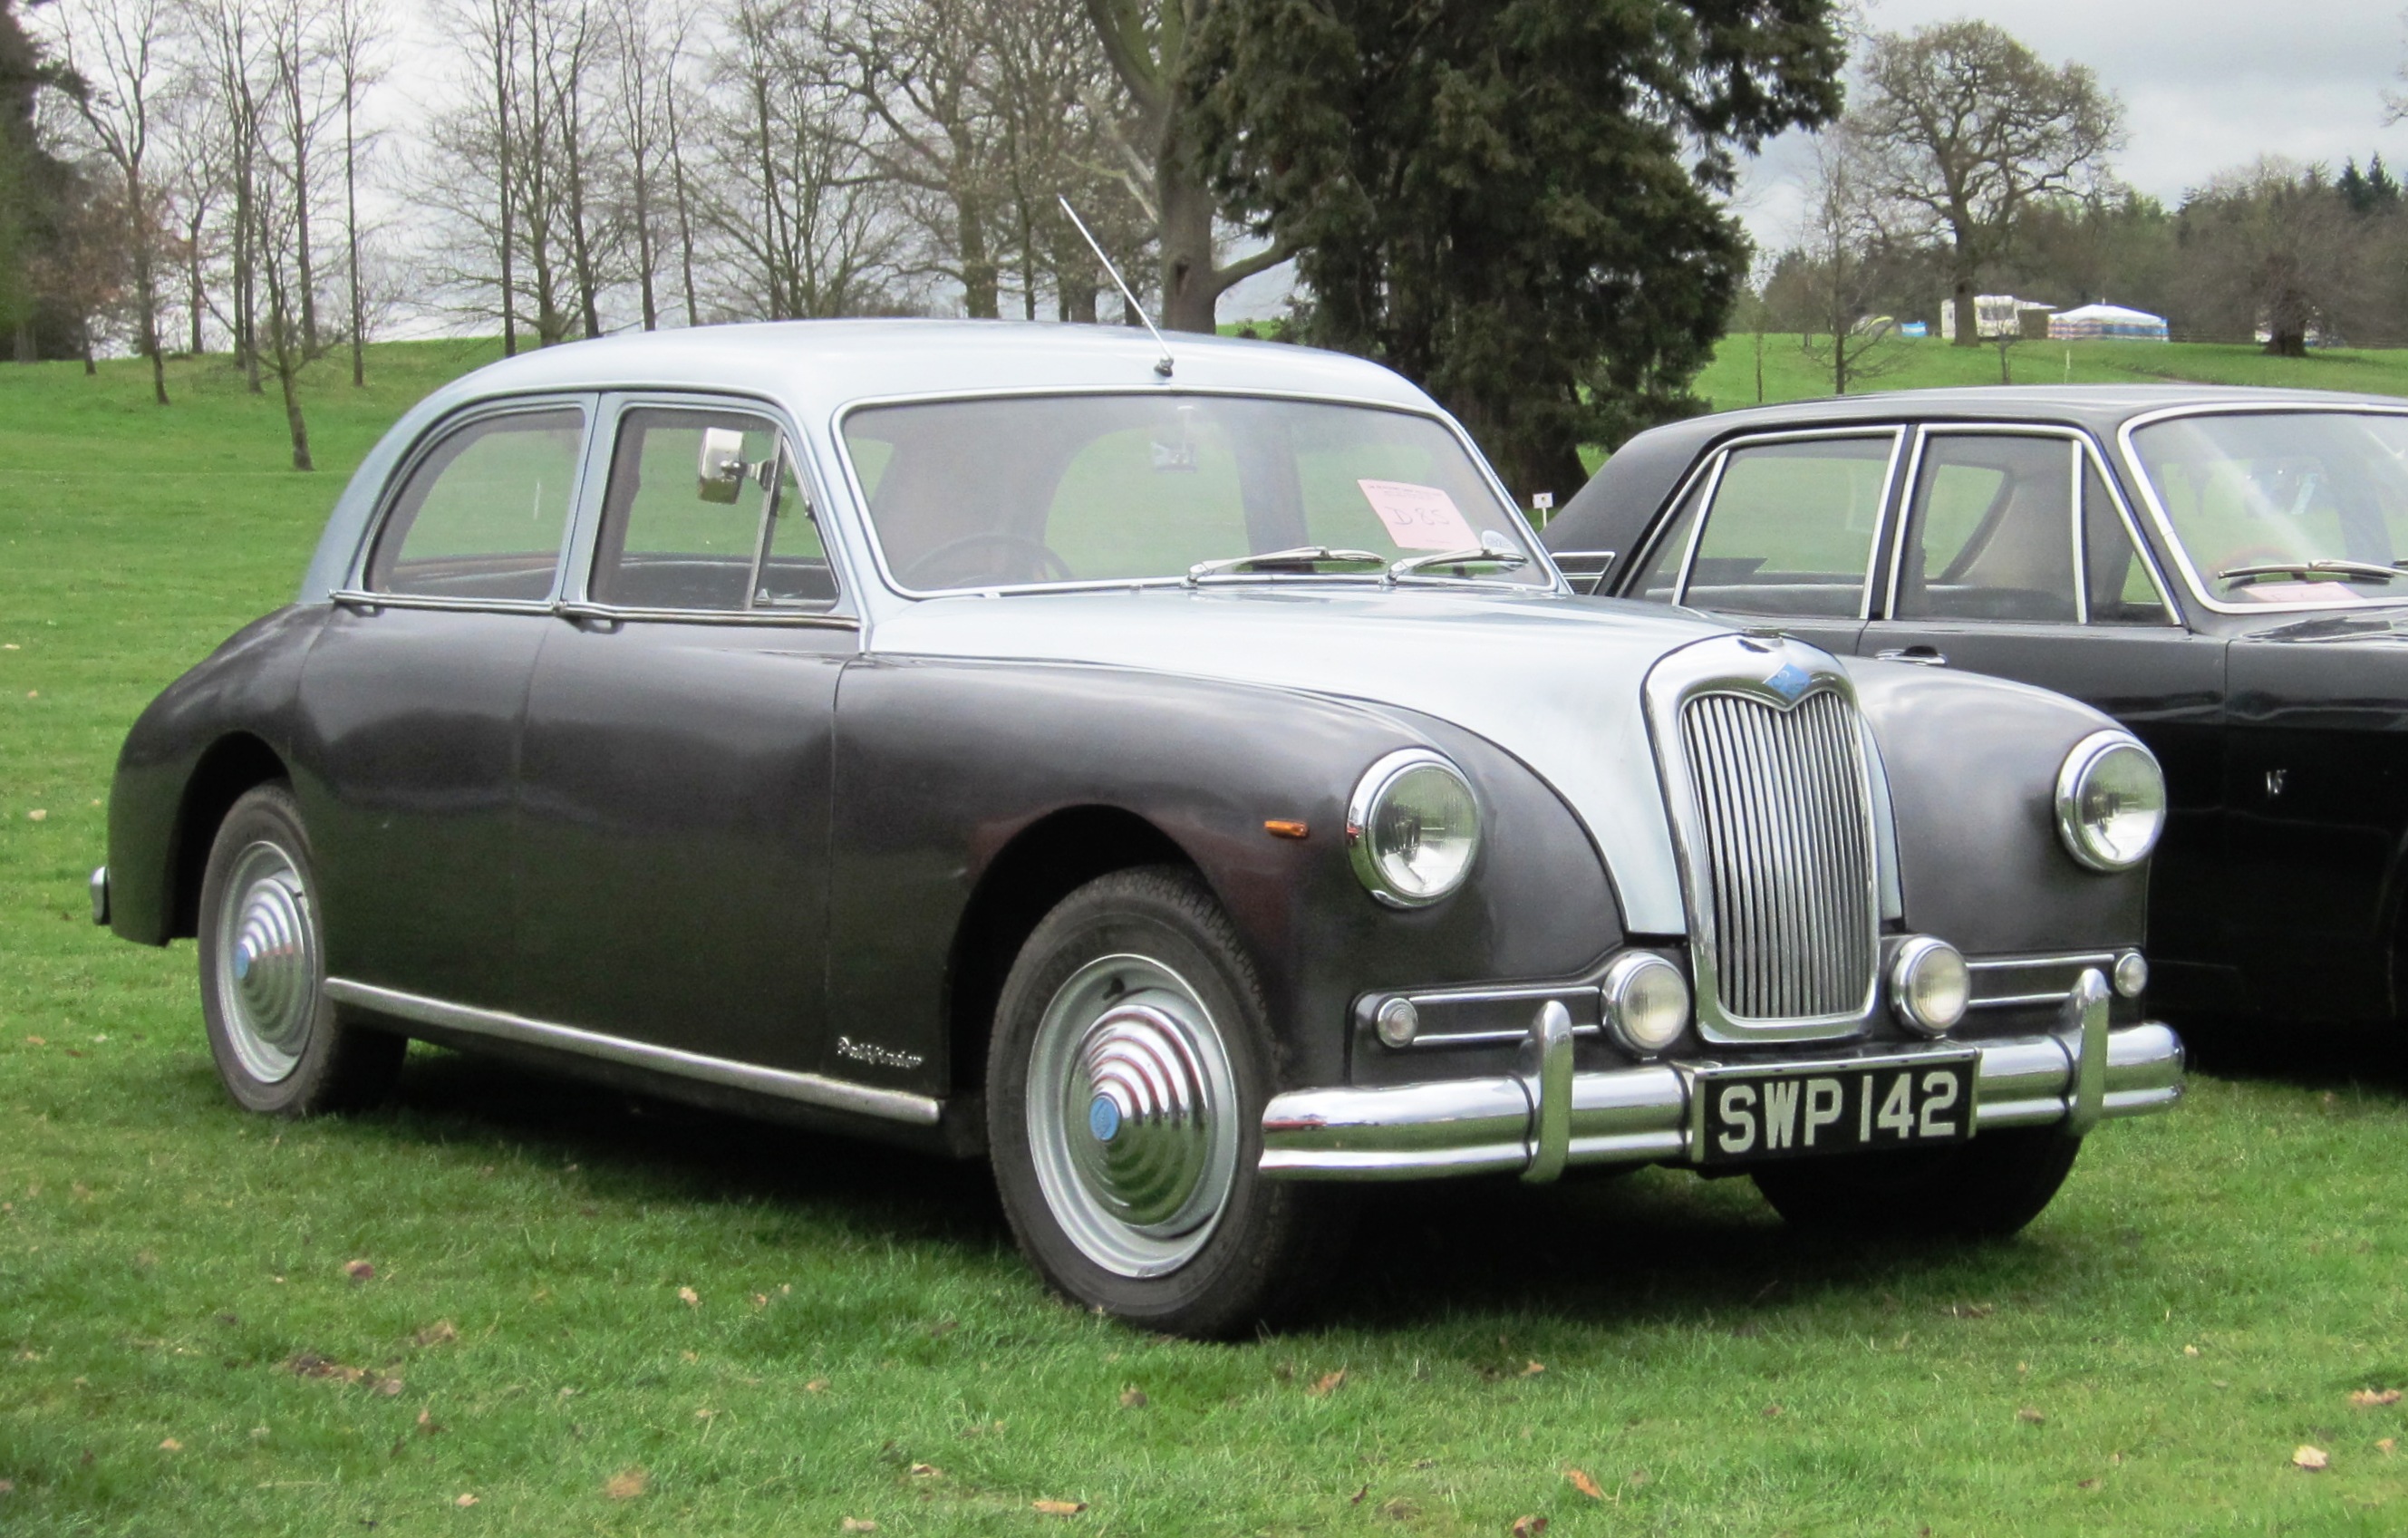 File:Riley 4-72 1965 front.jpg - Wikimedia Commons